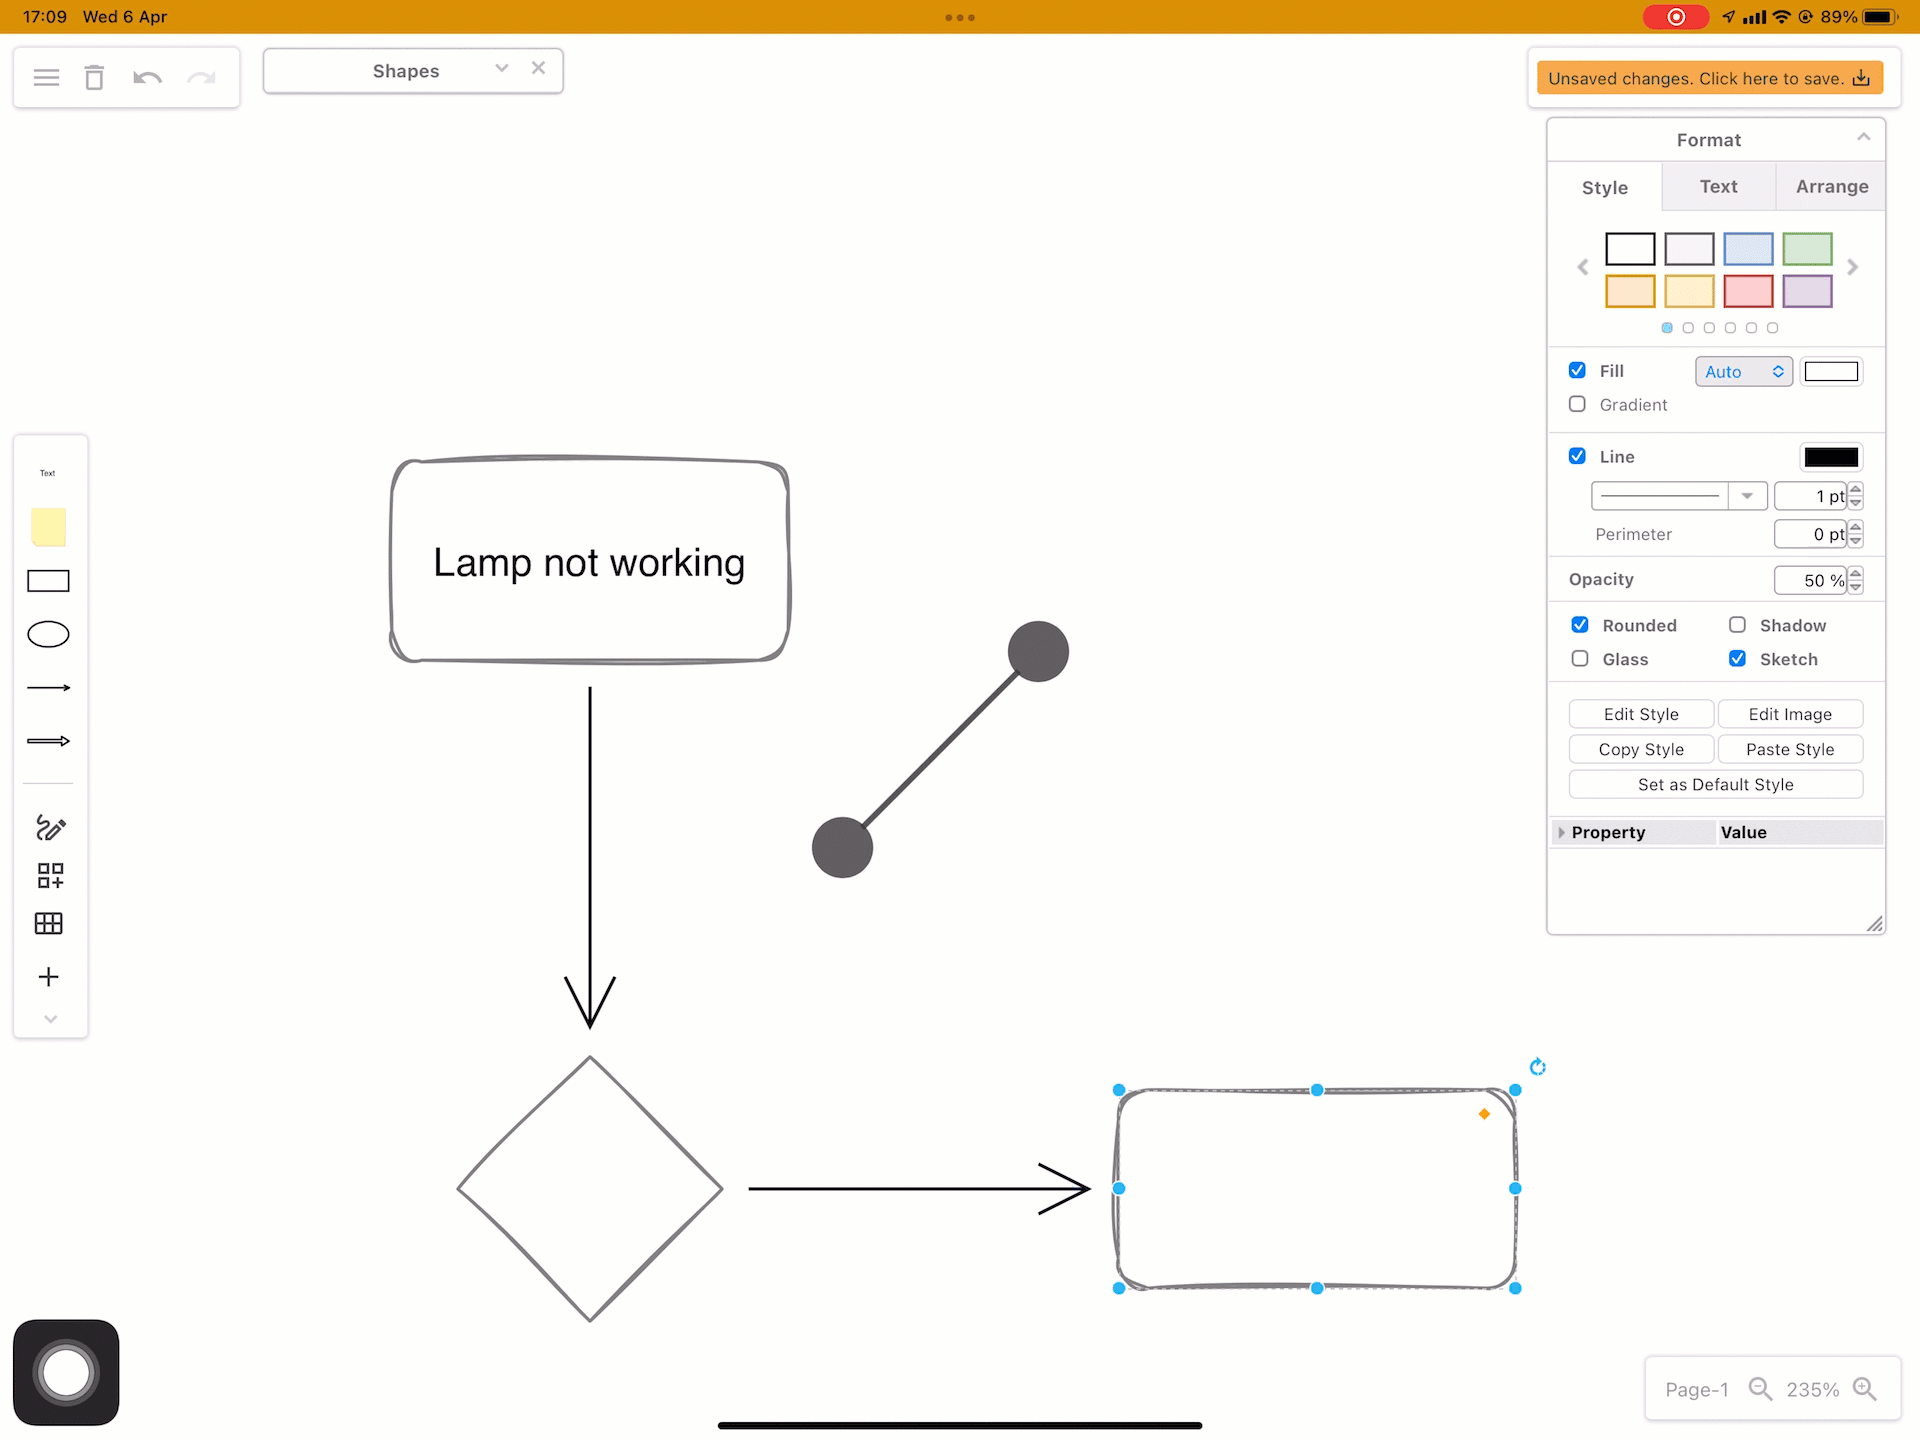 Pinch and spread fingers to zoom in and out on a touch screen in draw.io